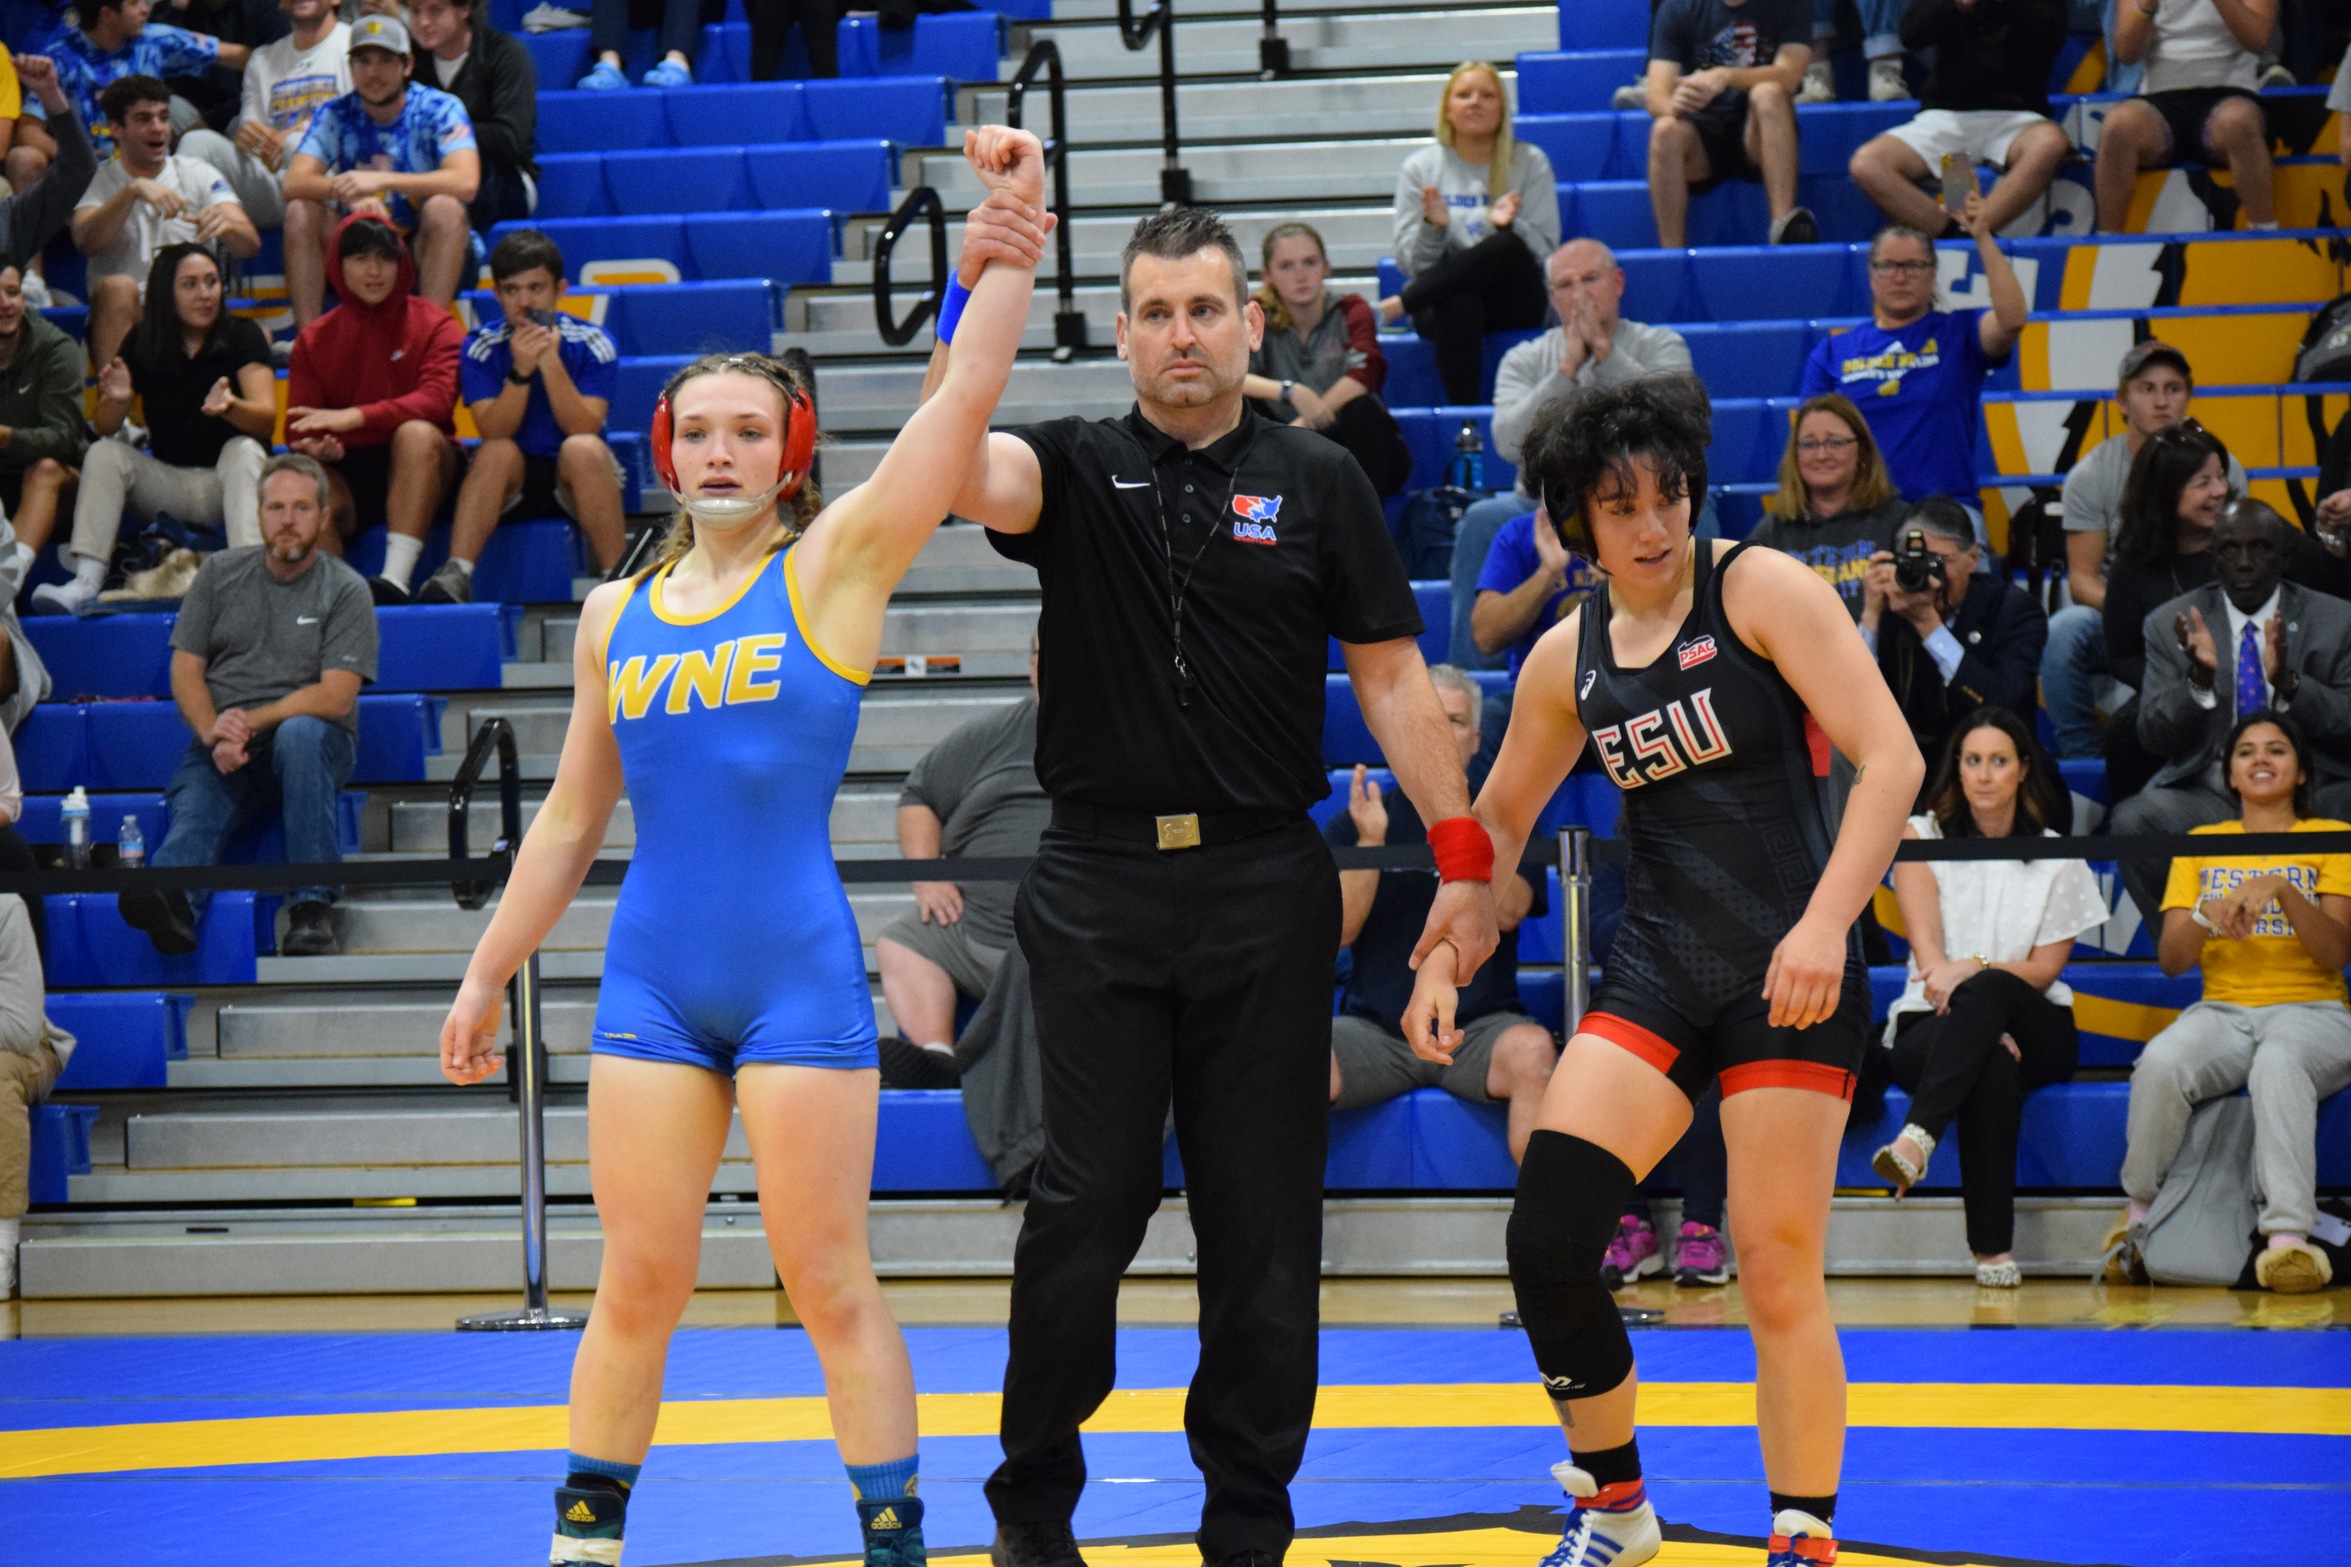 Golden Bears Women’s Wrestling Competes in Inaugural Match